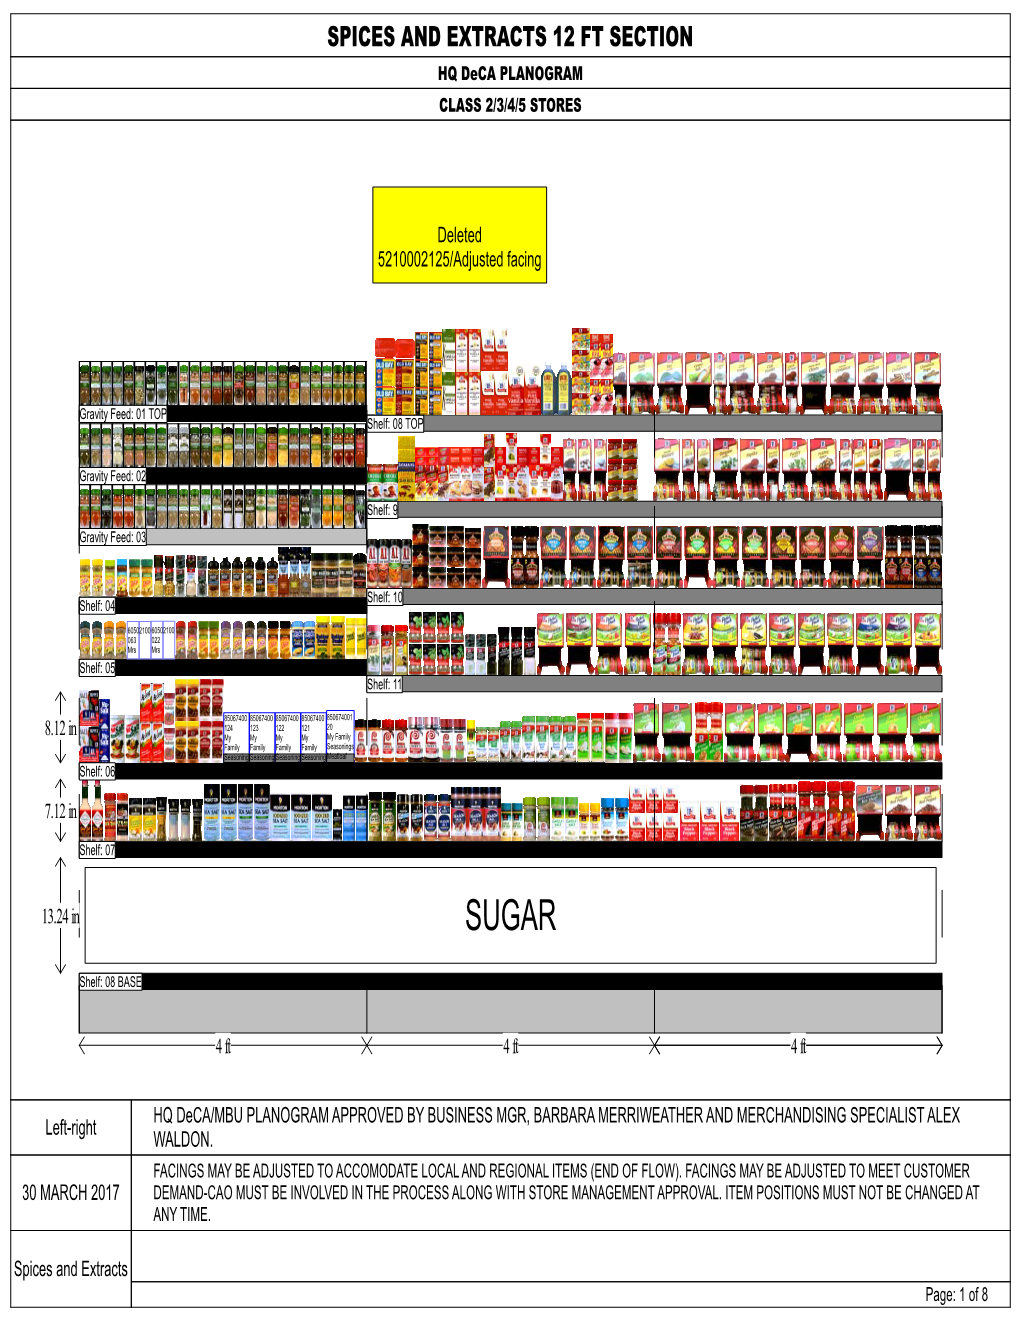 SPICES and EXTRACTS 12 FT SECTION HQ Deca PLANOGRAM CLASS 2/3/4/5 STORES